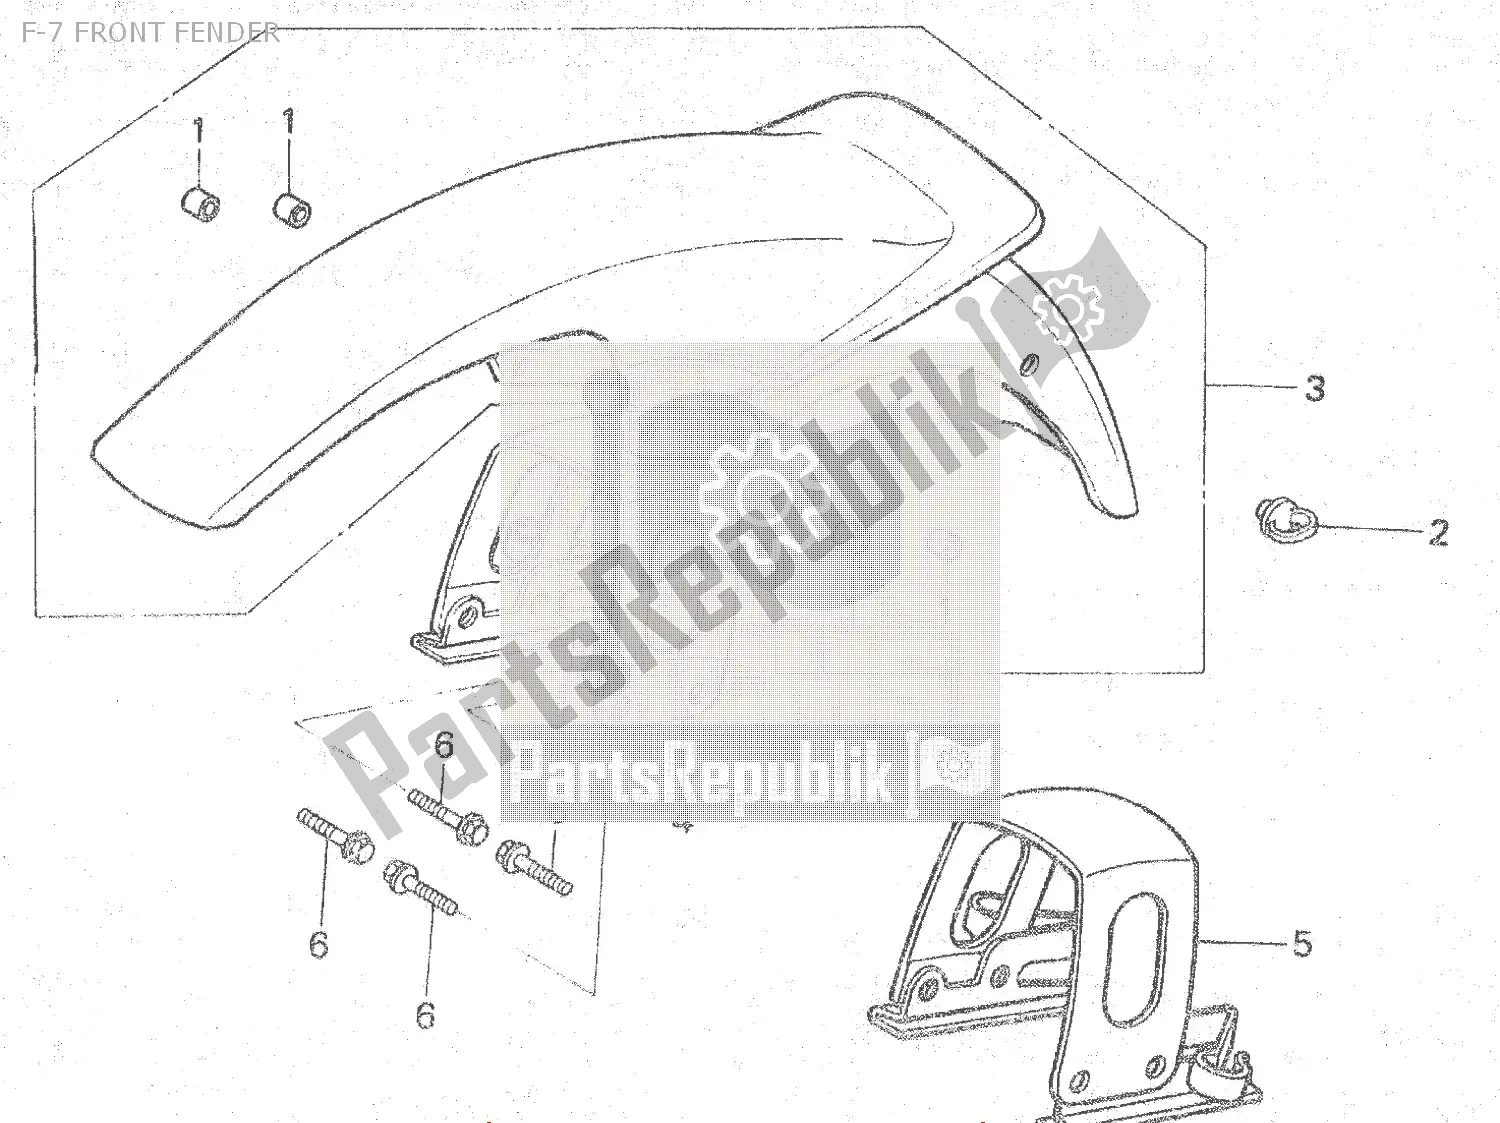 All parts for the F-7 Front Fender of the Honda MBX 80 1983